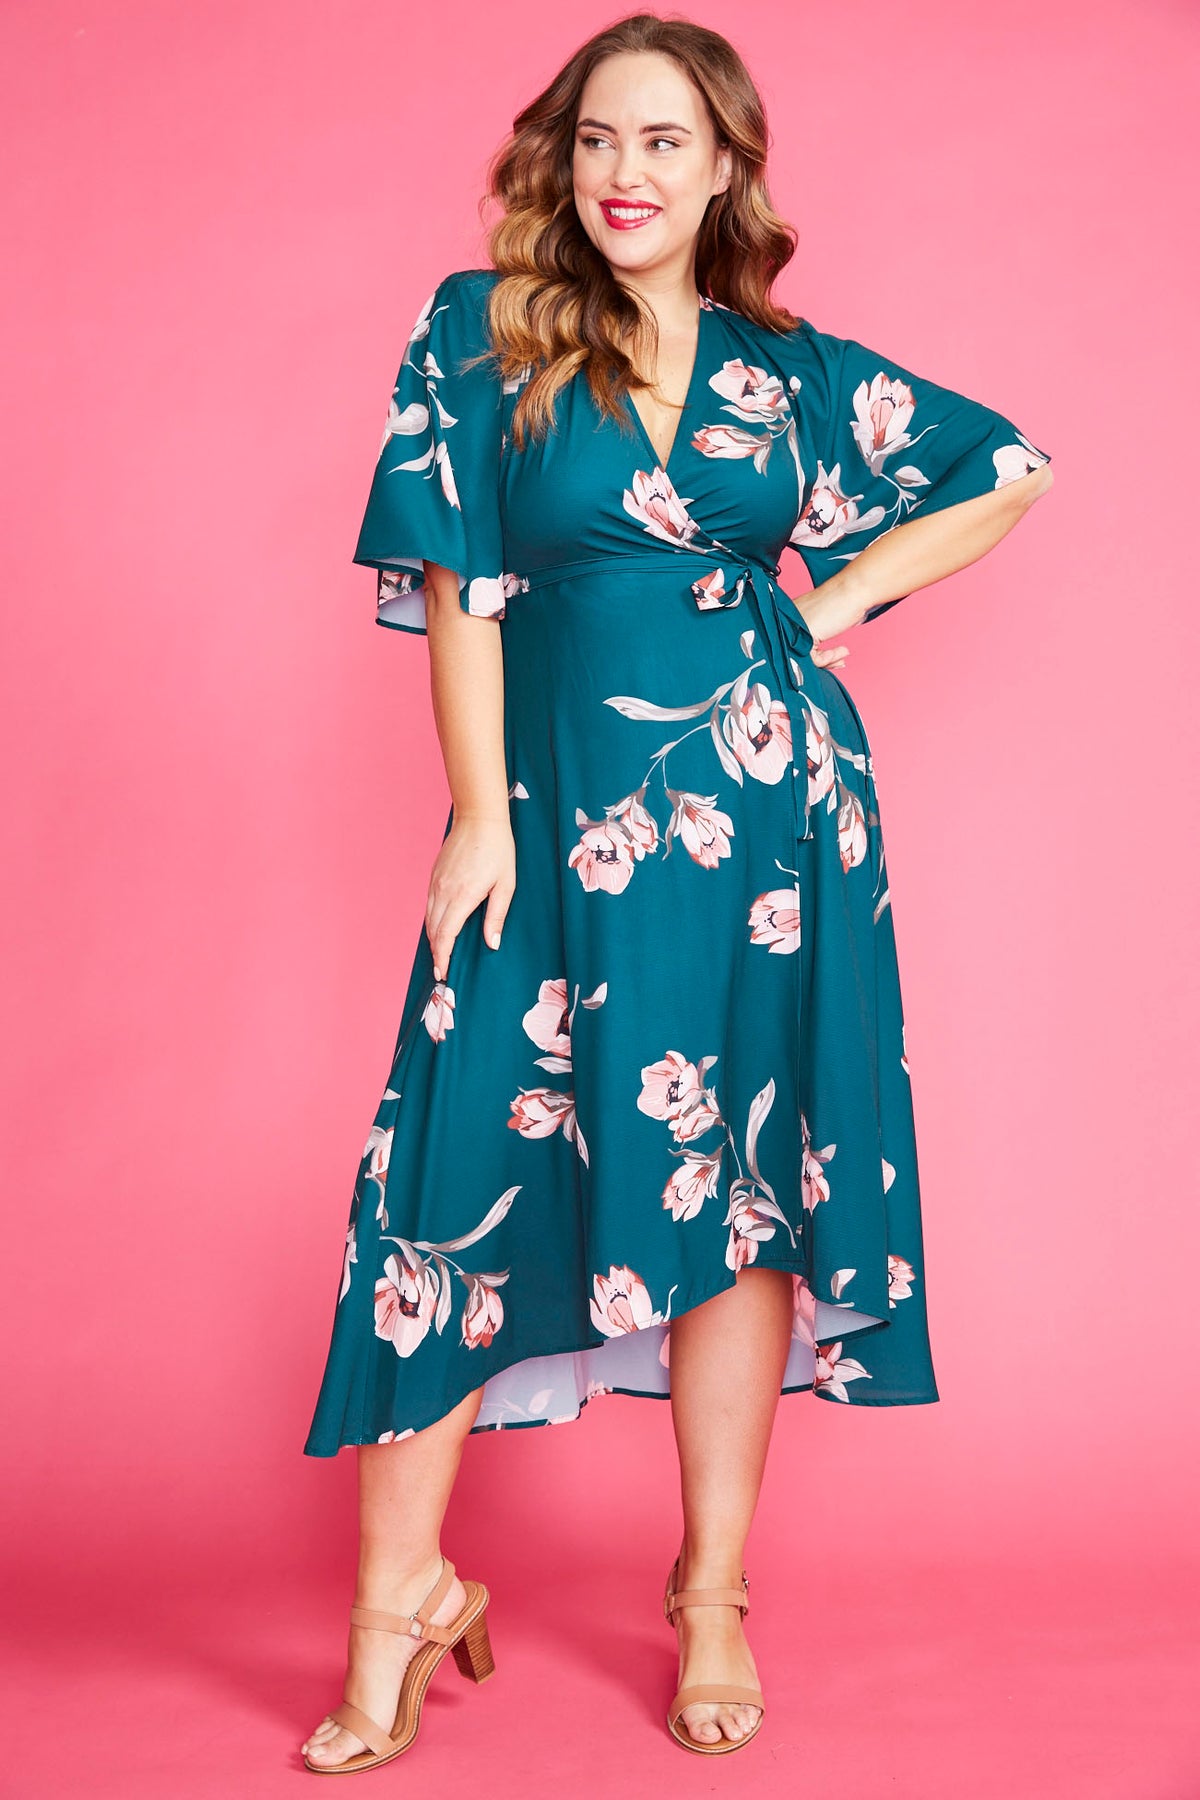 Teal Floral Wrap Dress Store, 68% OFF ...